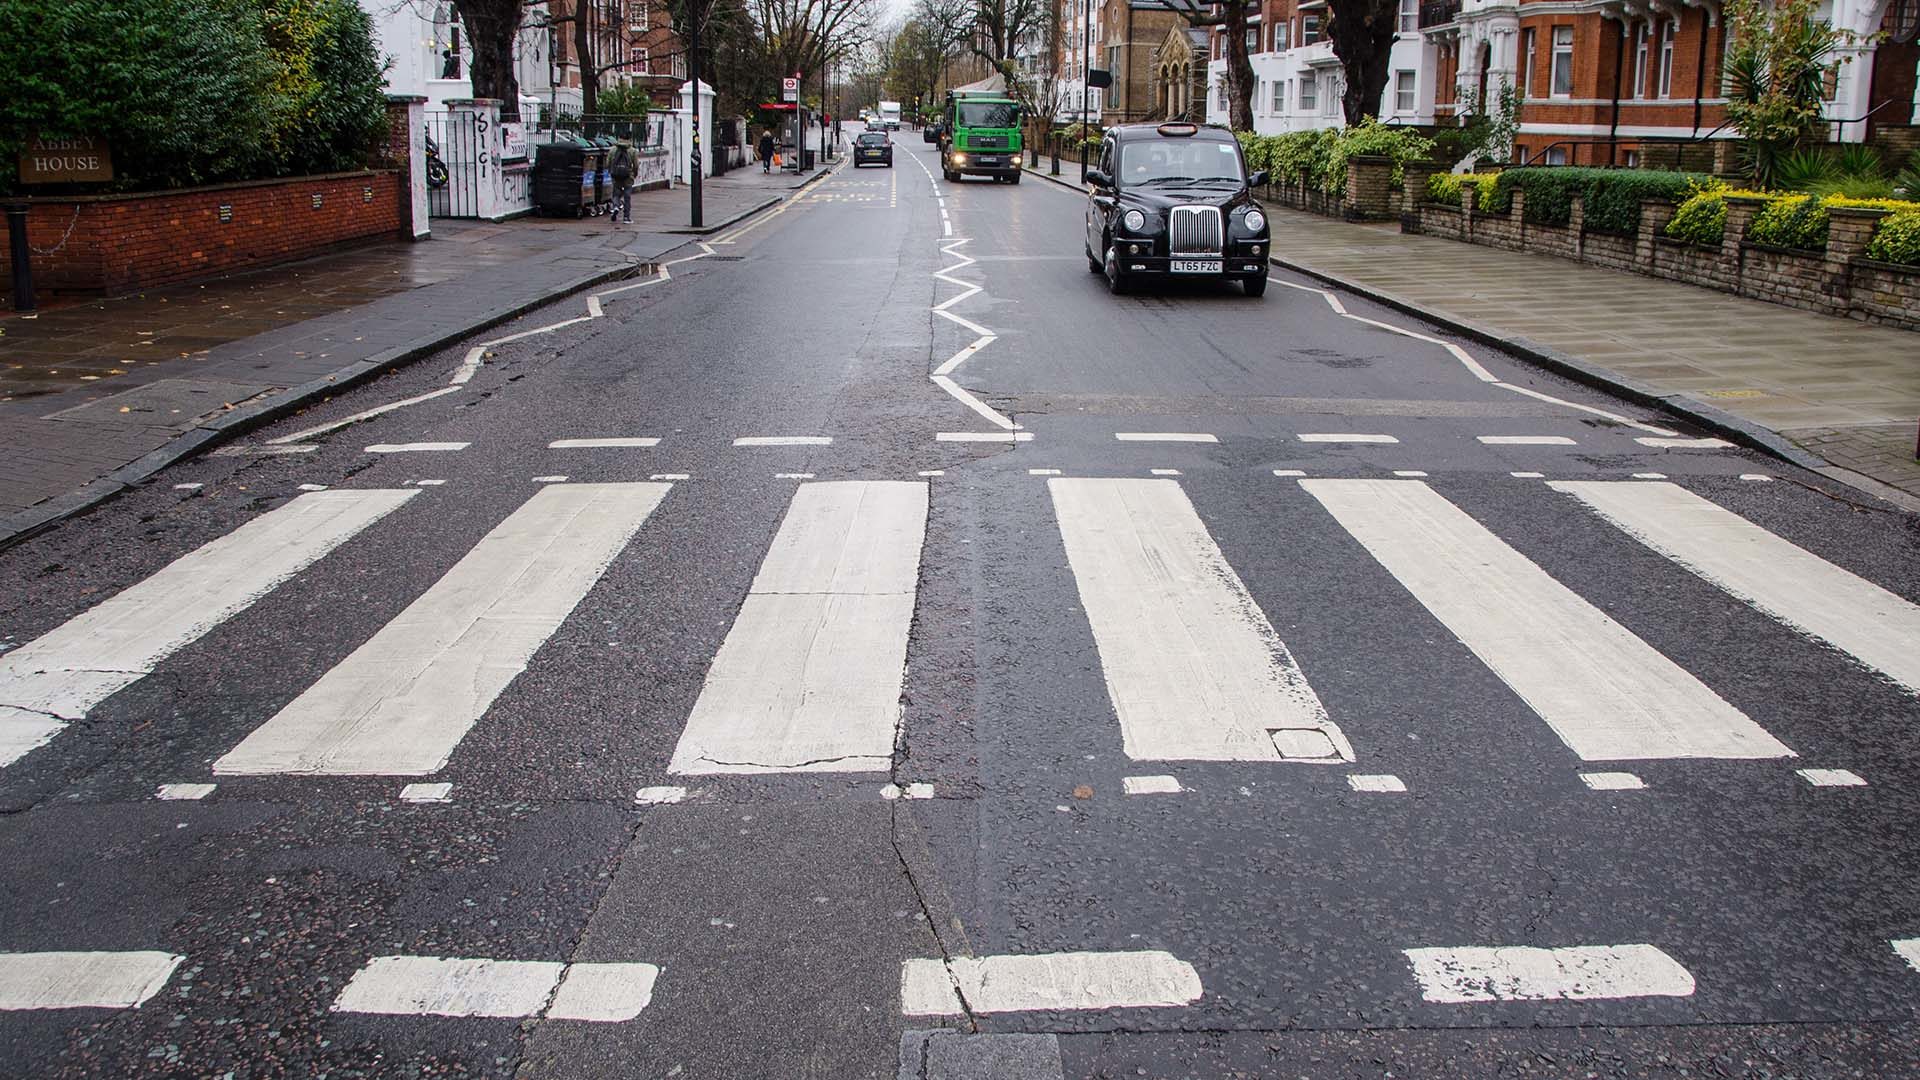 Explained: the different types of pedestrian crossings